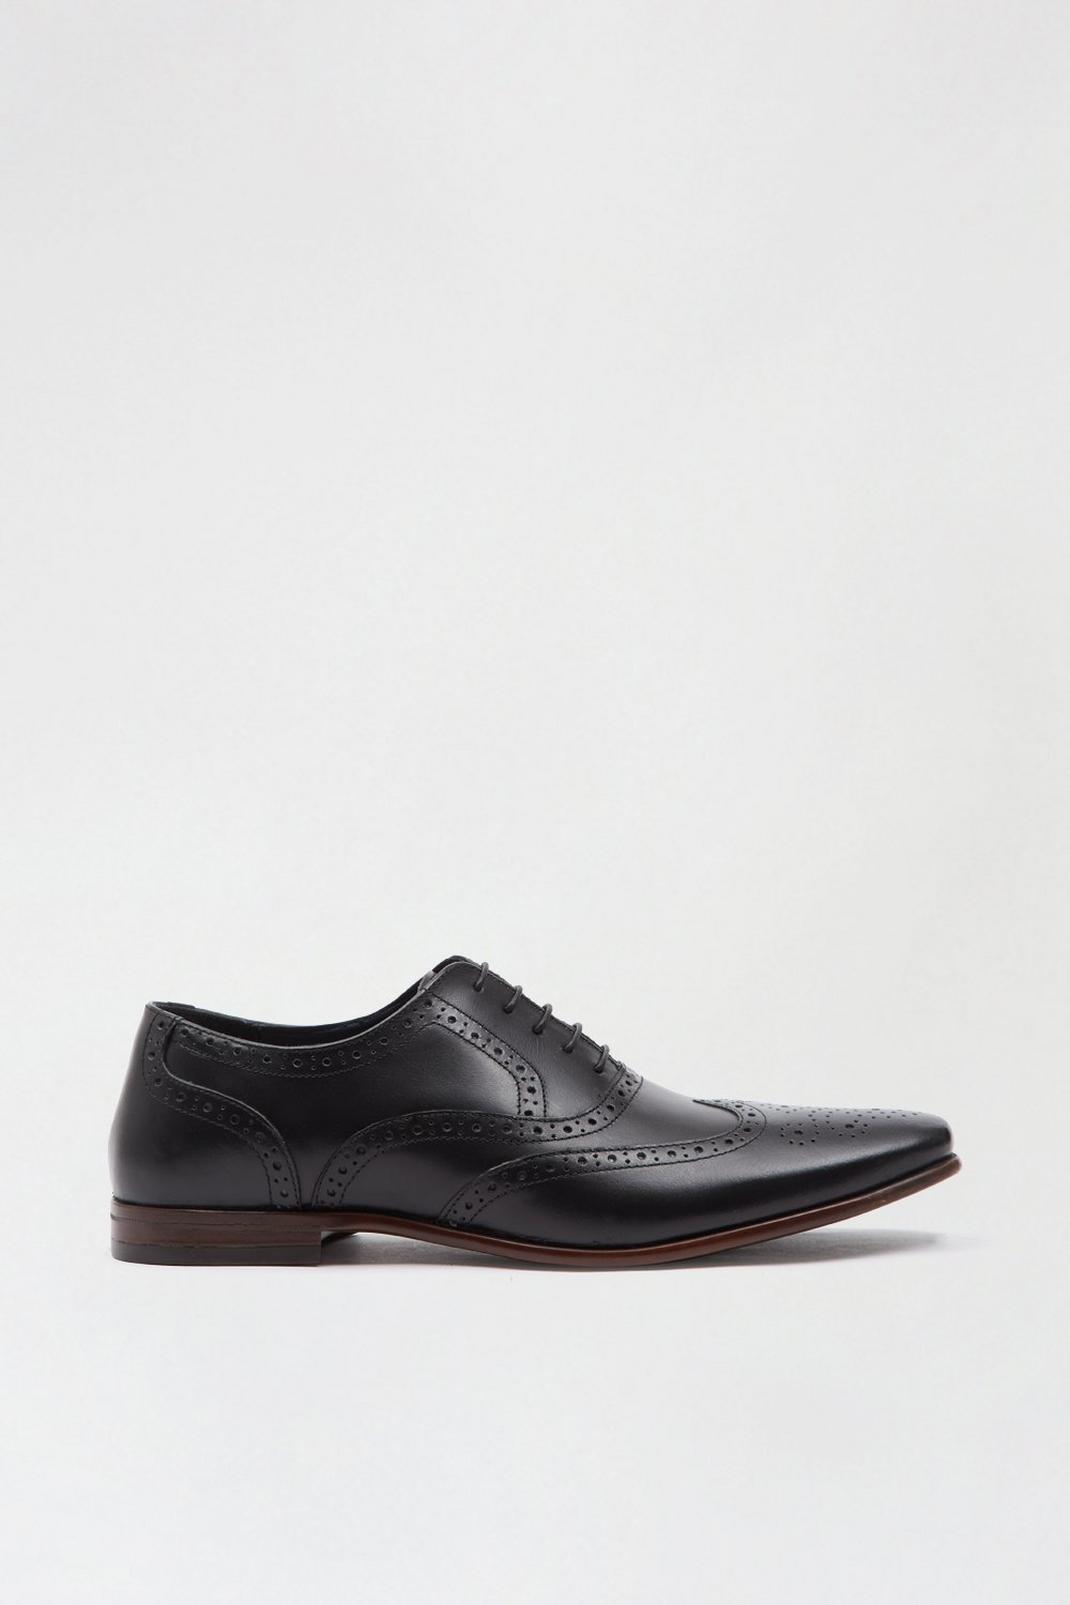 Black Leather Oxford Brogue Shoes image number 1